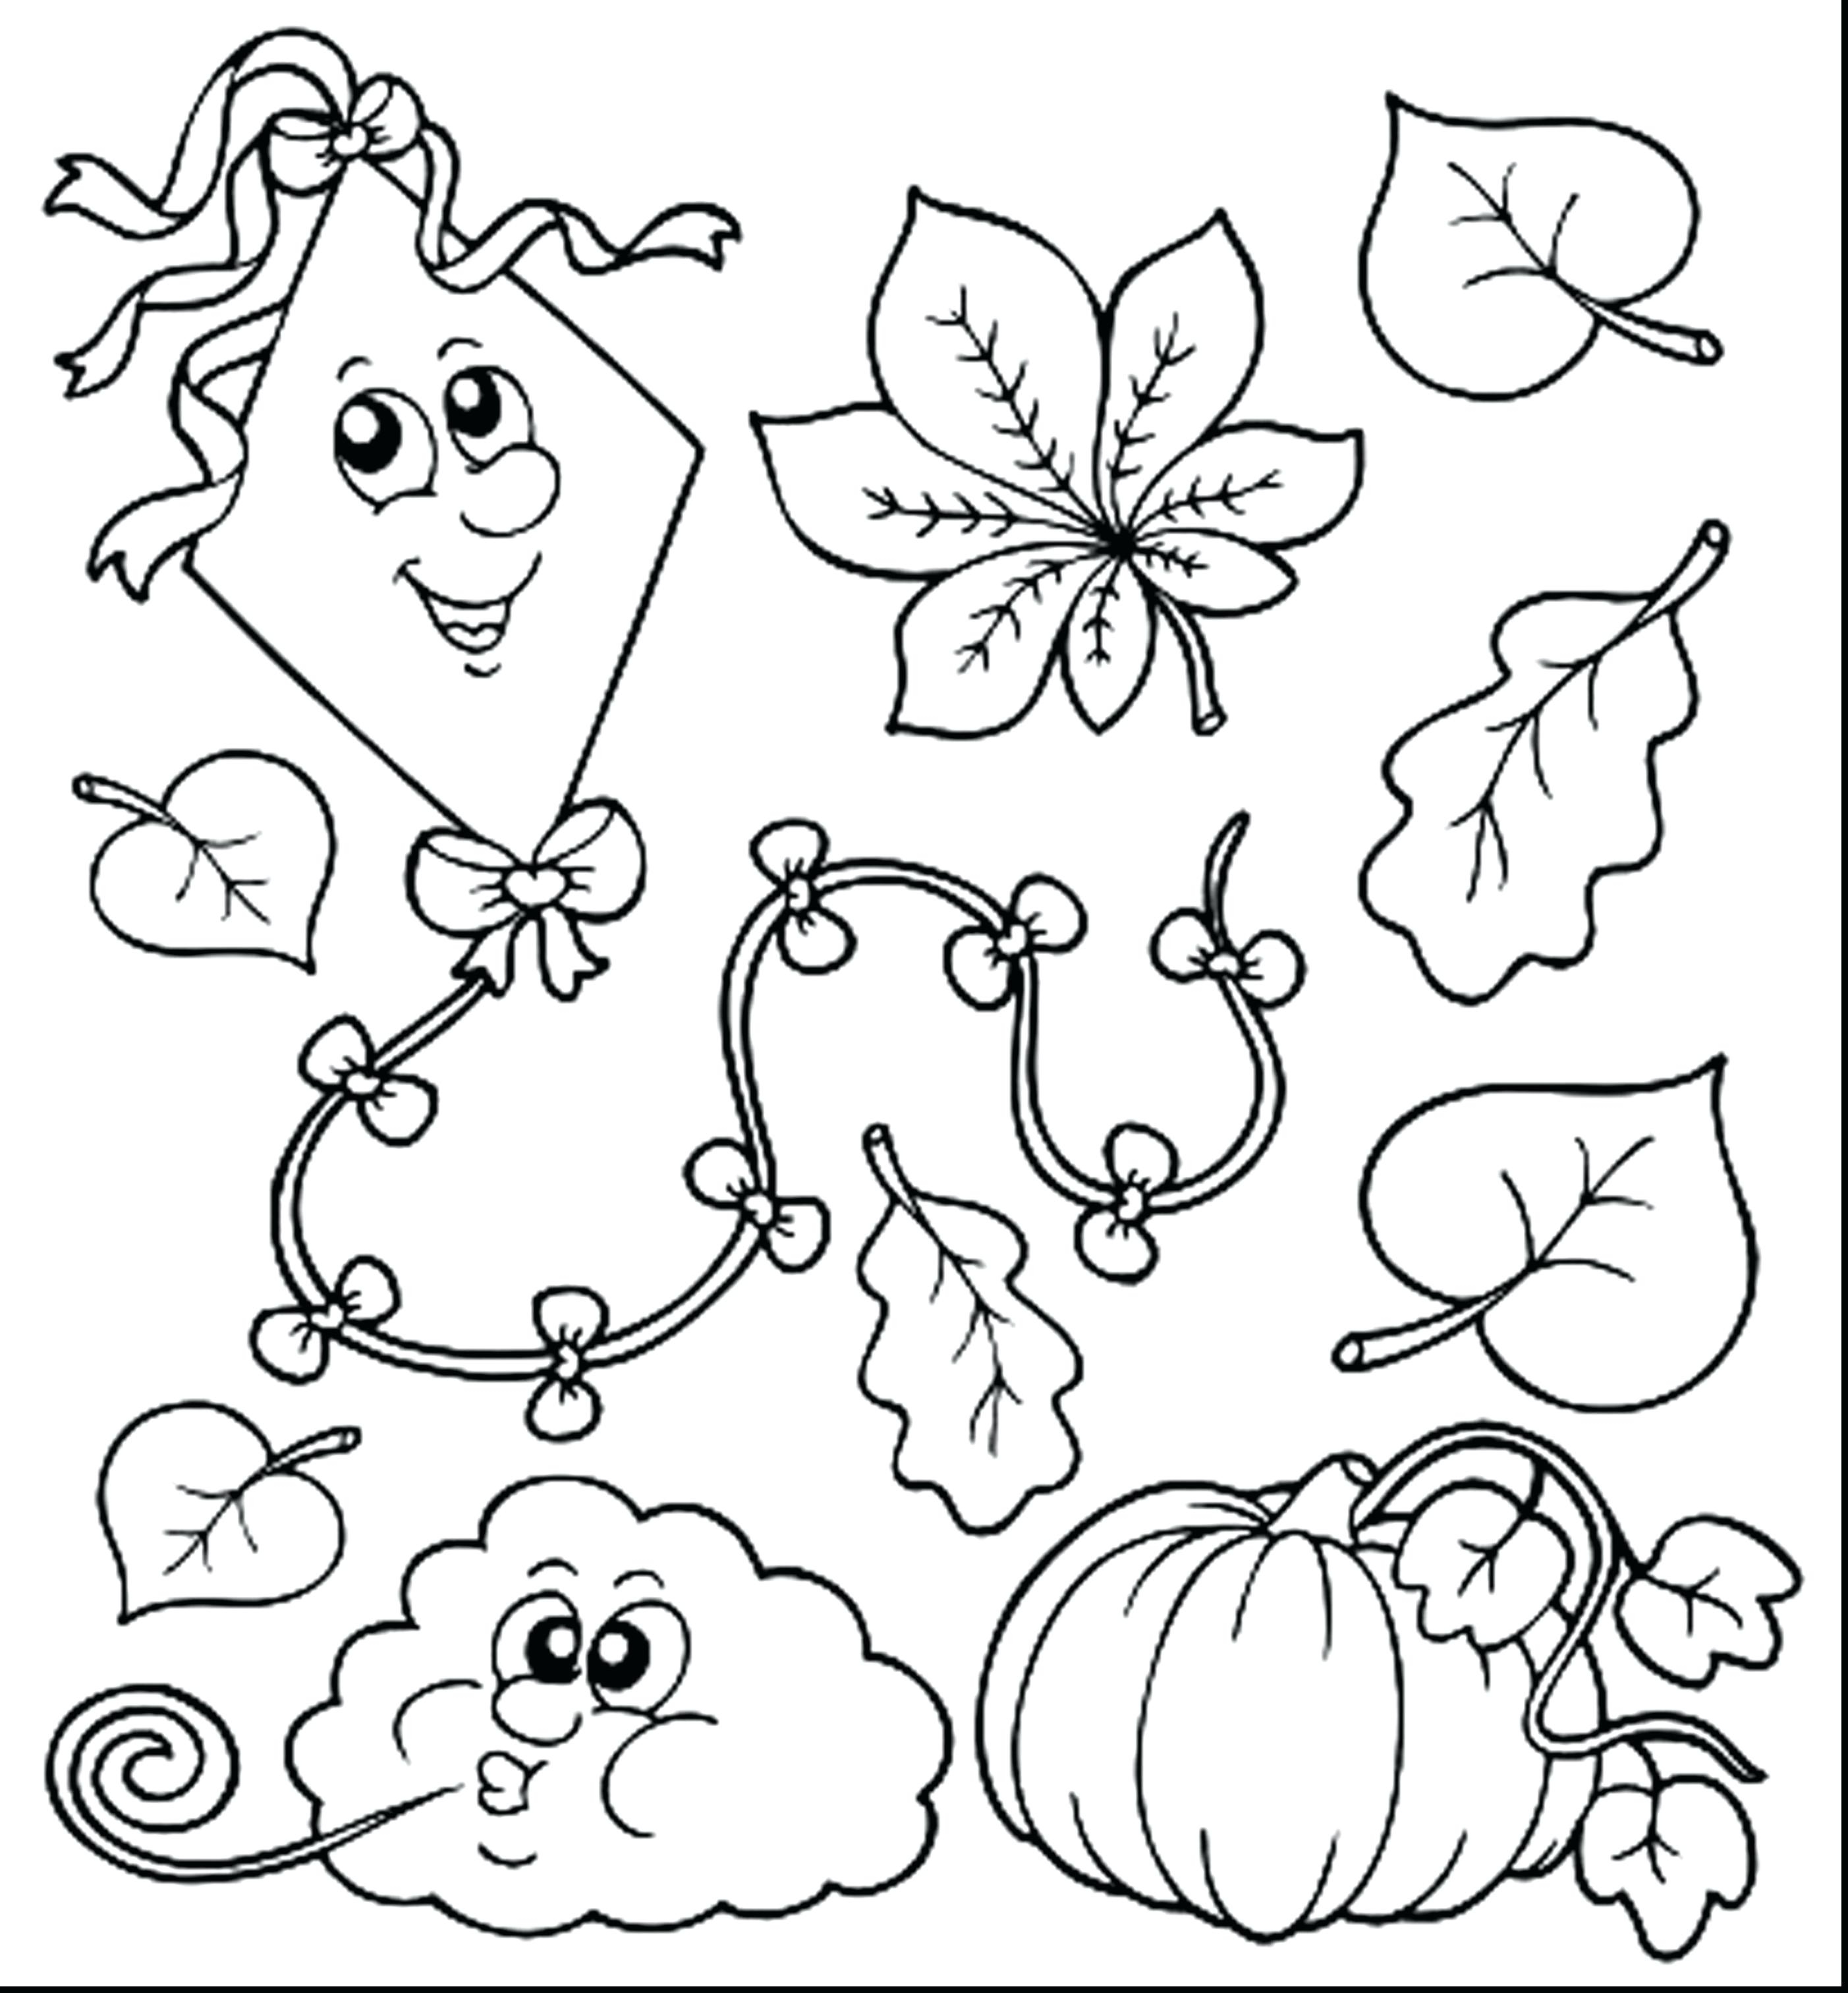 Free Printable Christmas Coloring Pages For Elementary Students